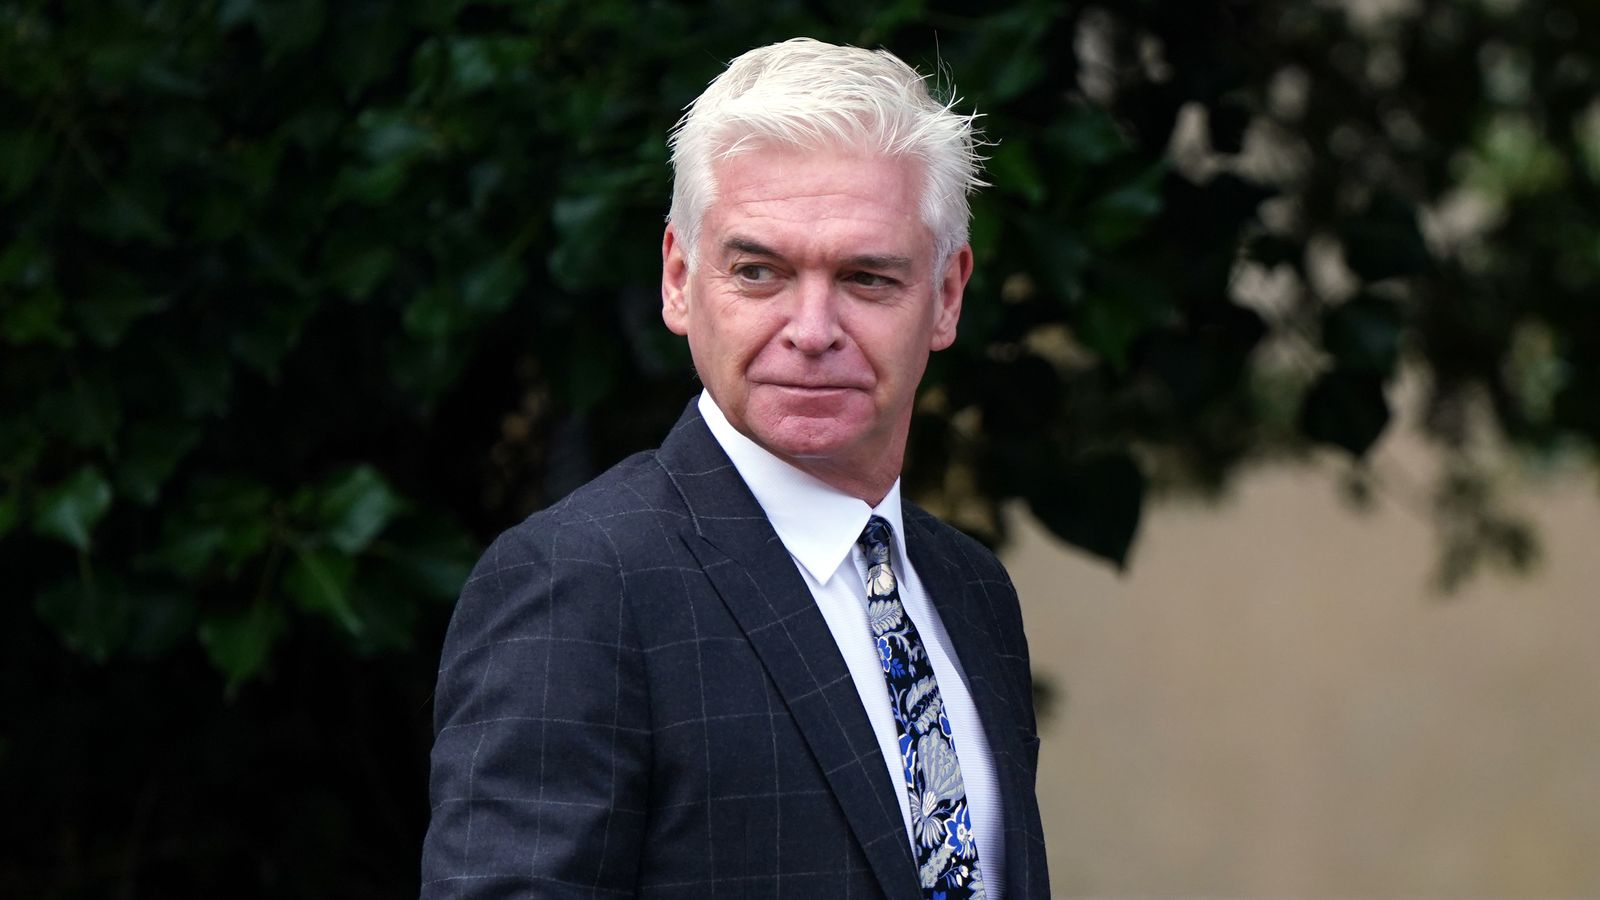 Phillip Schofield - what did ITV know? The key questions as broadcaster's bosses face MPs